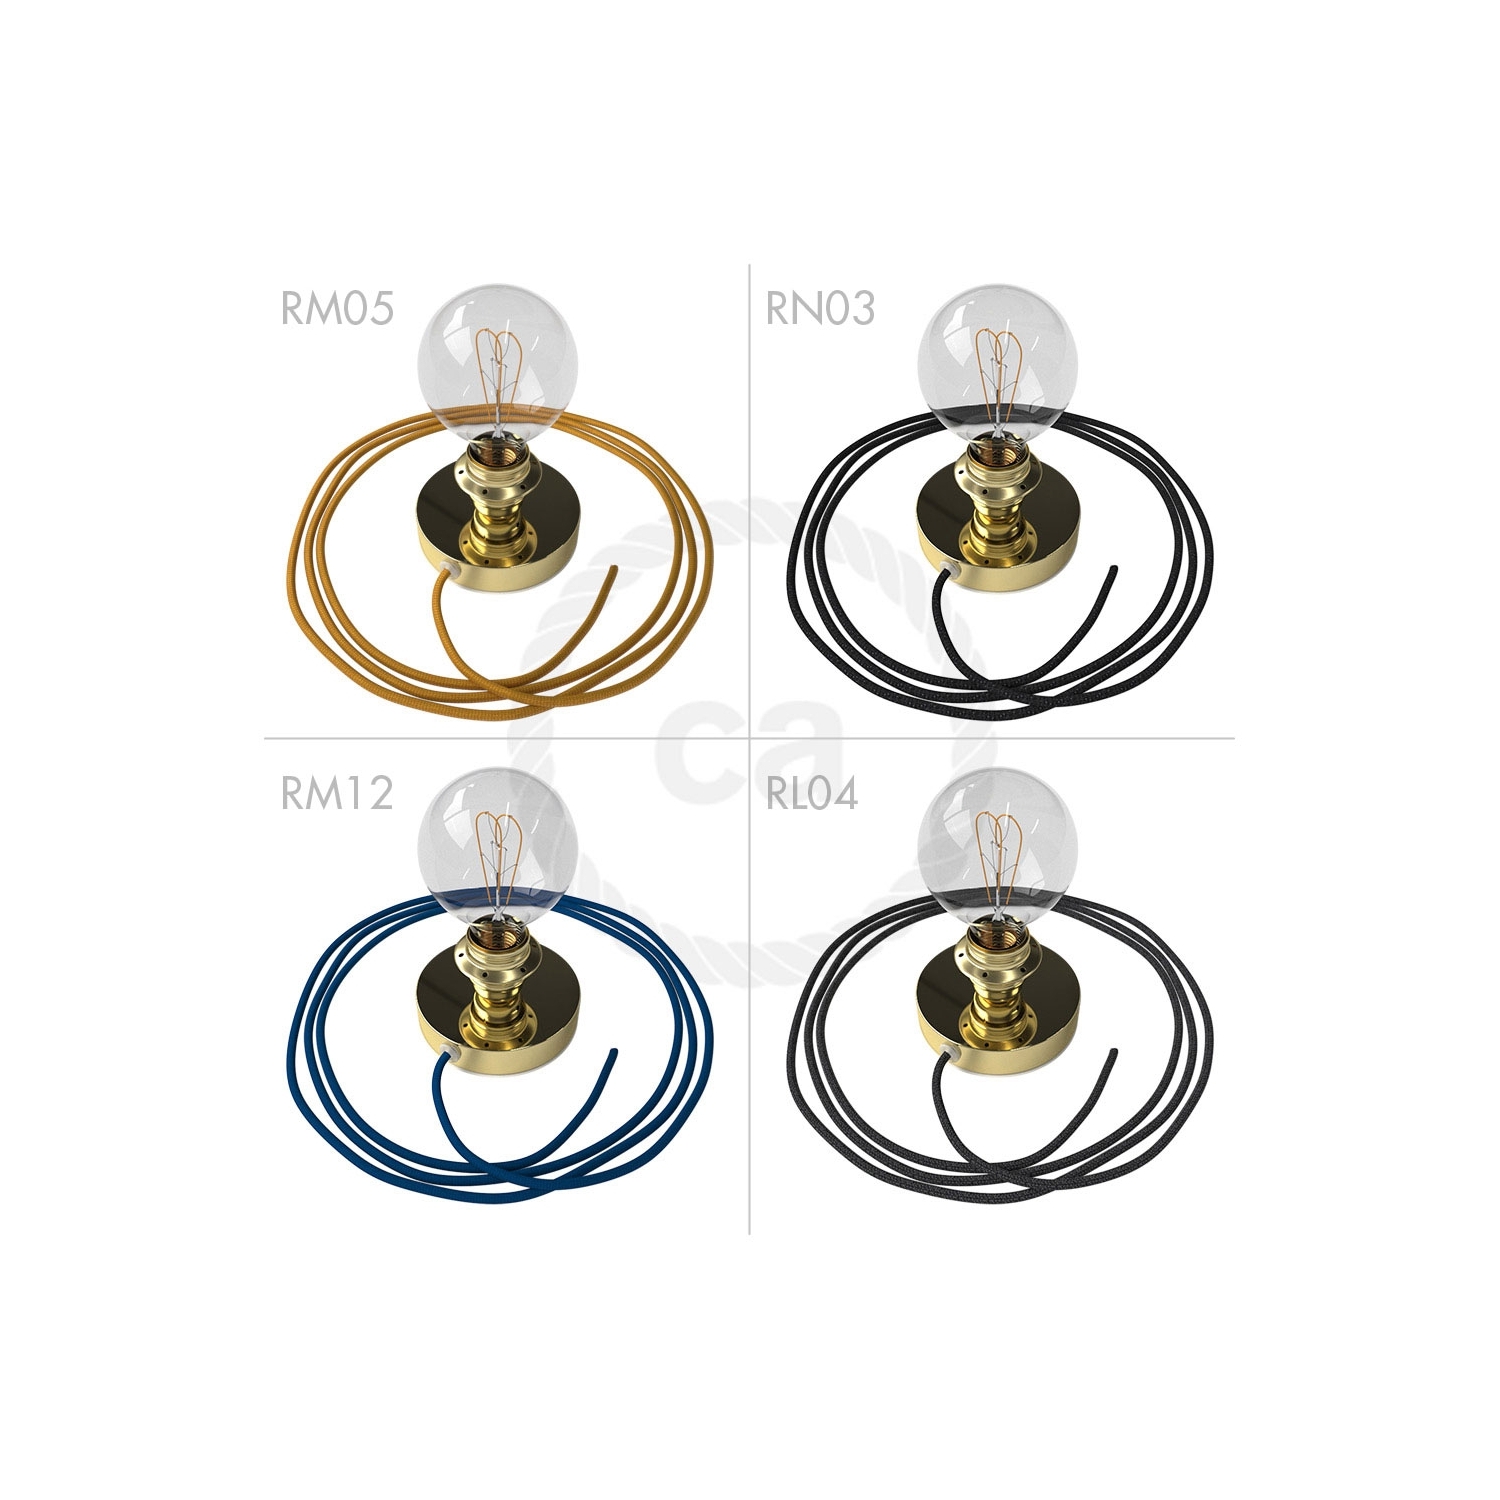 Spostaluce, the brass metal light source with E26 threaded socket, fabric cable and side holes